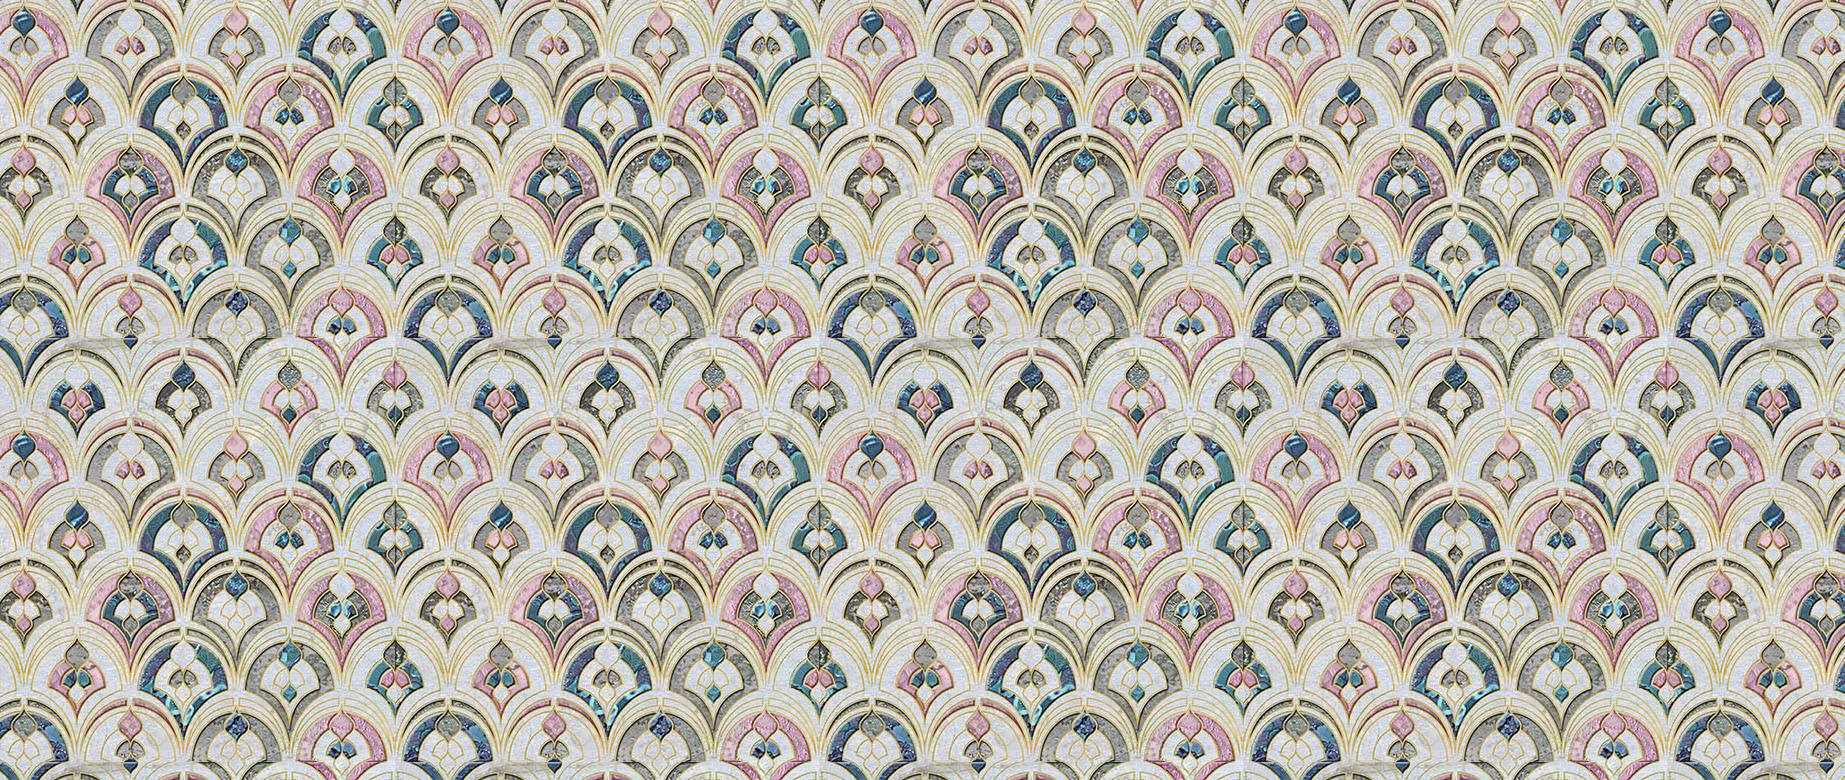 ornate-shell-tiles-wallpaper-seamless-repeat-view